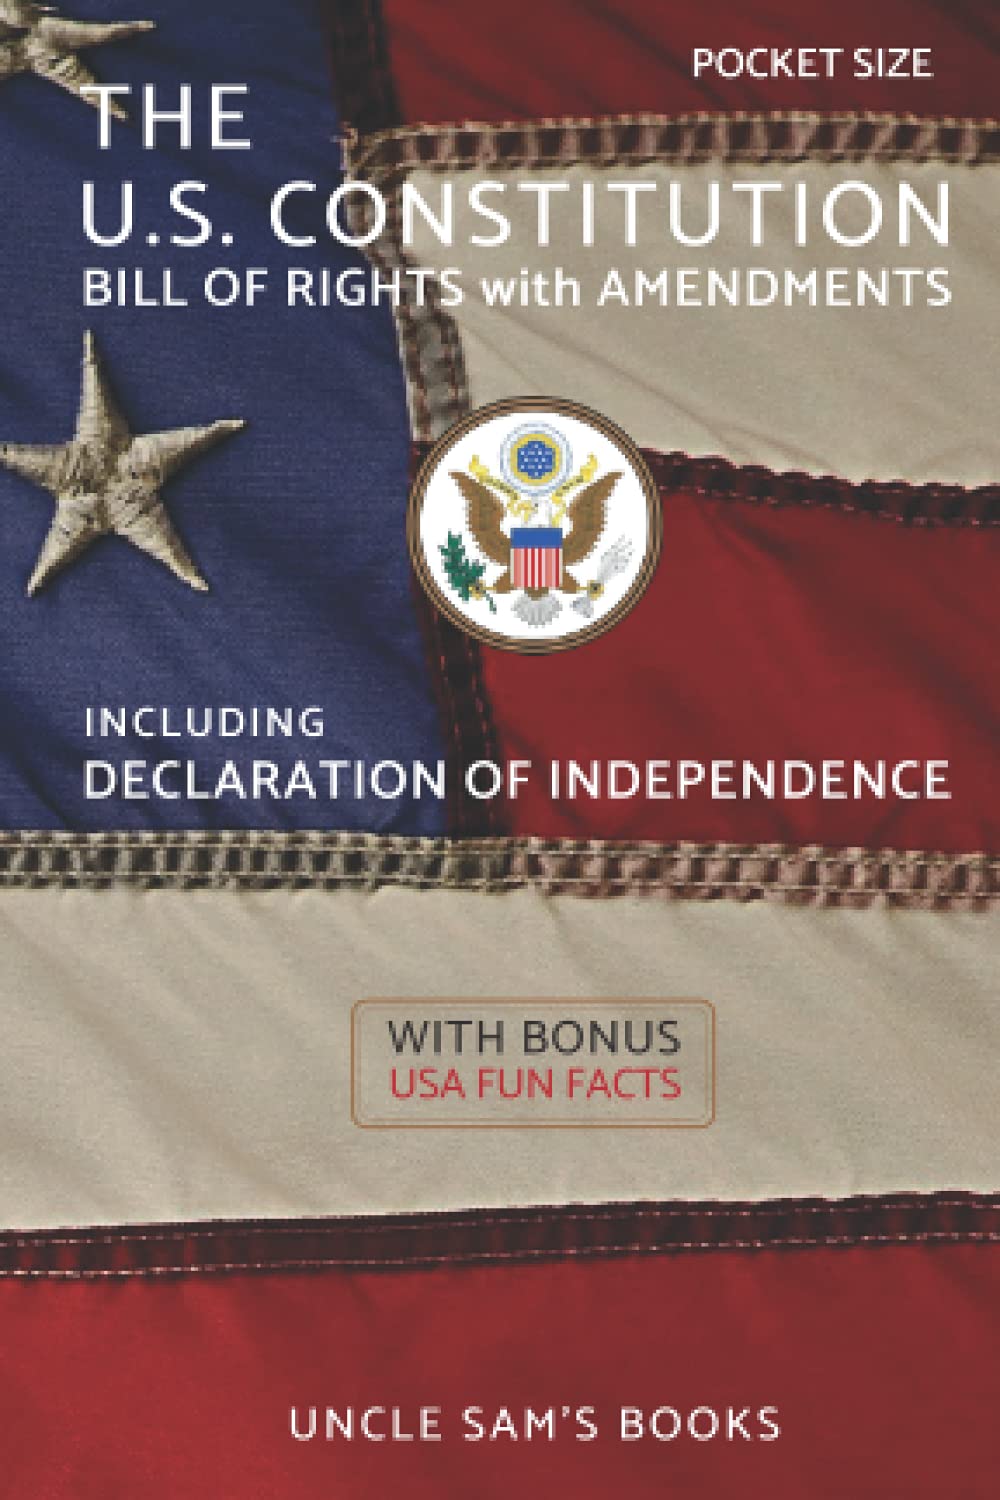 The U.S. Constitution, Declaration of Independence, Bill of Rights with Amendments: Pocket Size (Annotated)